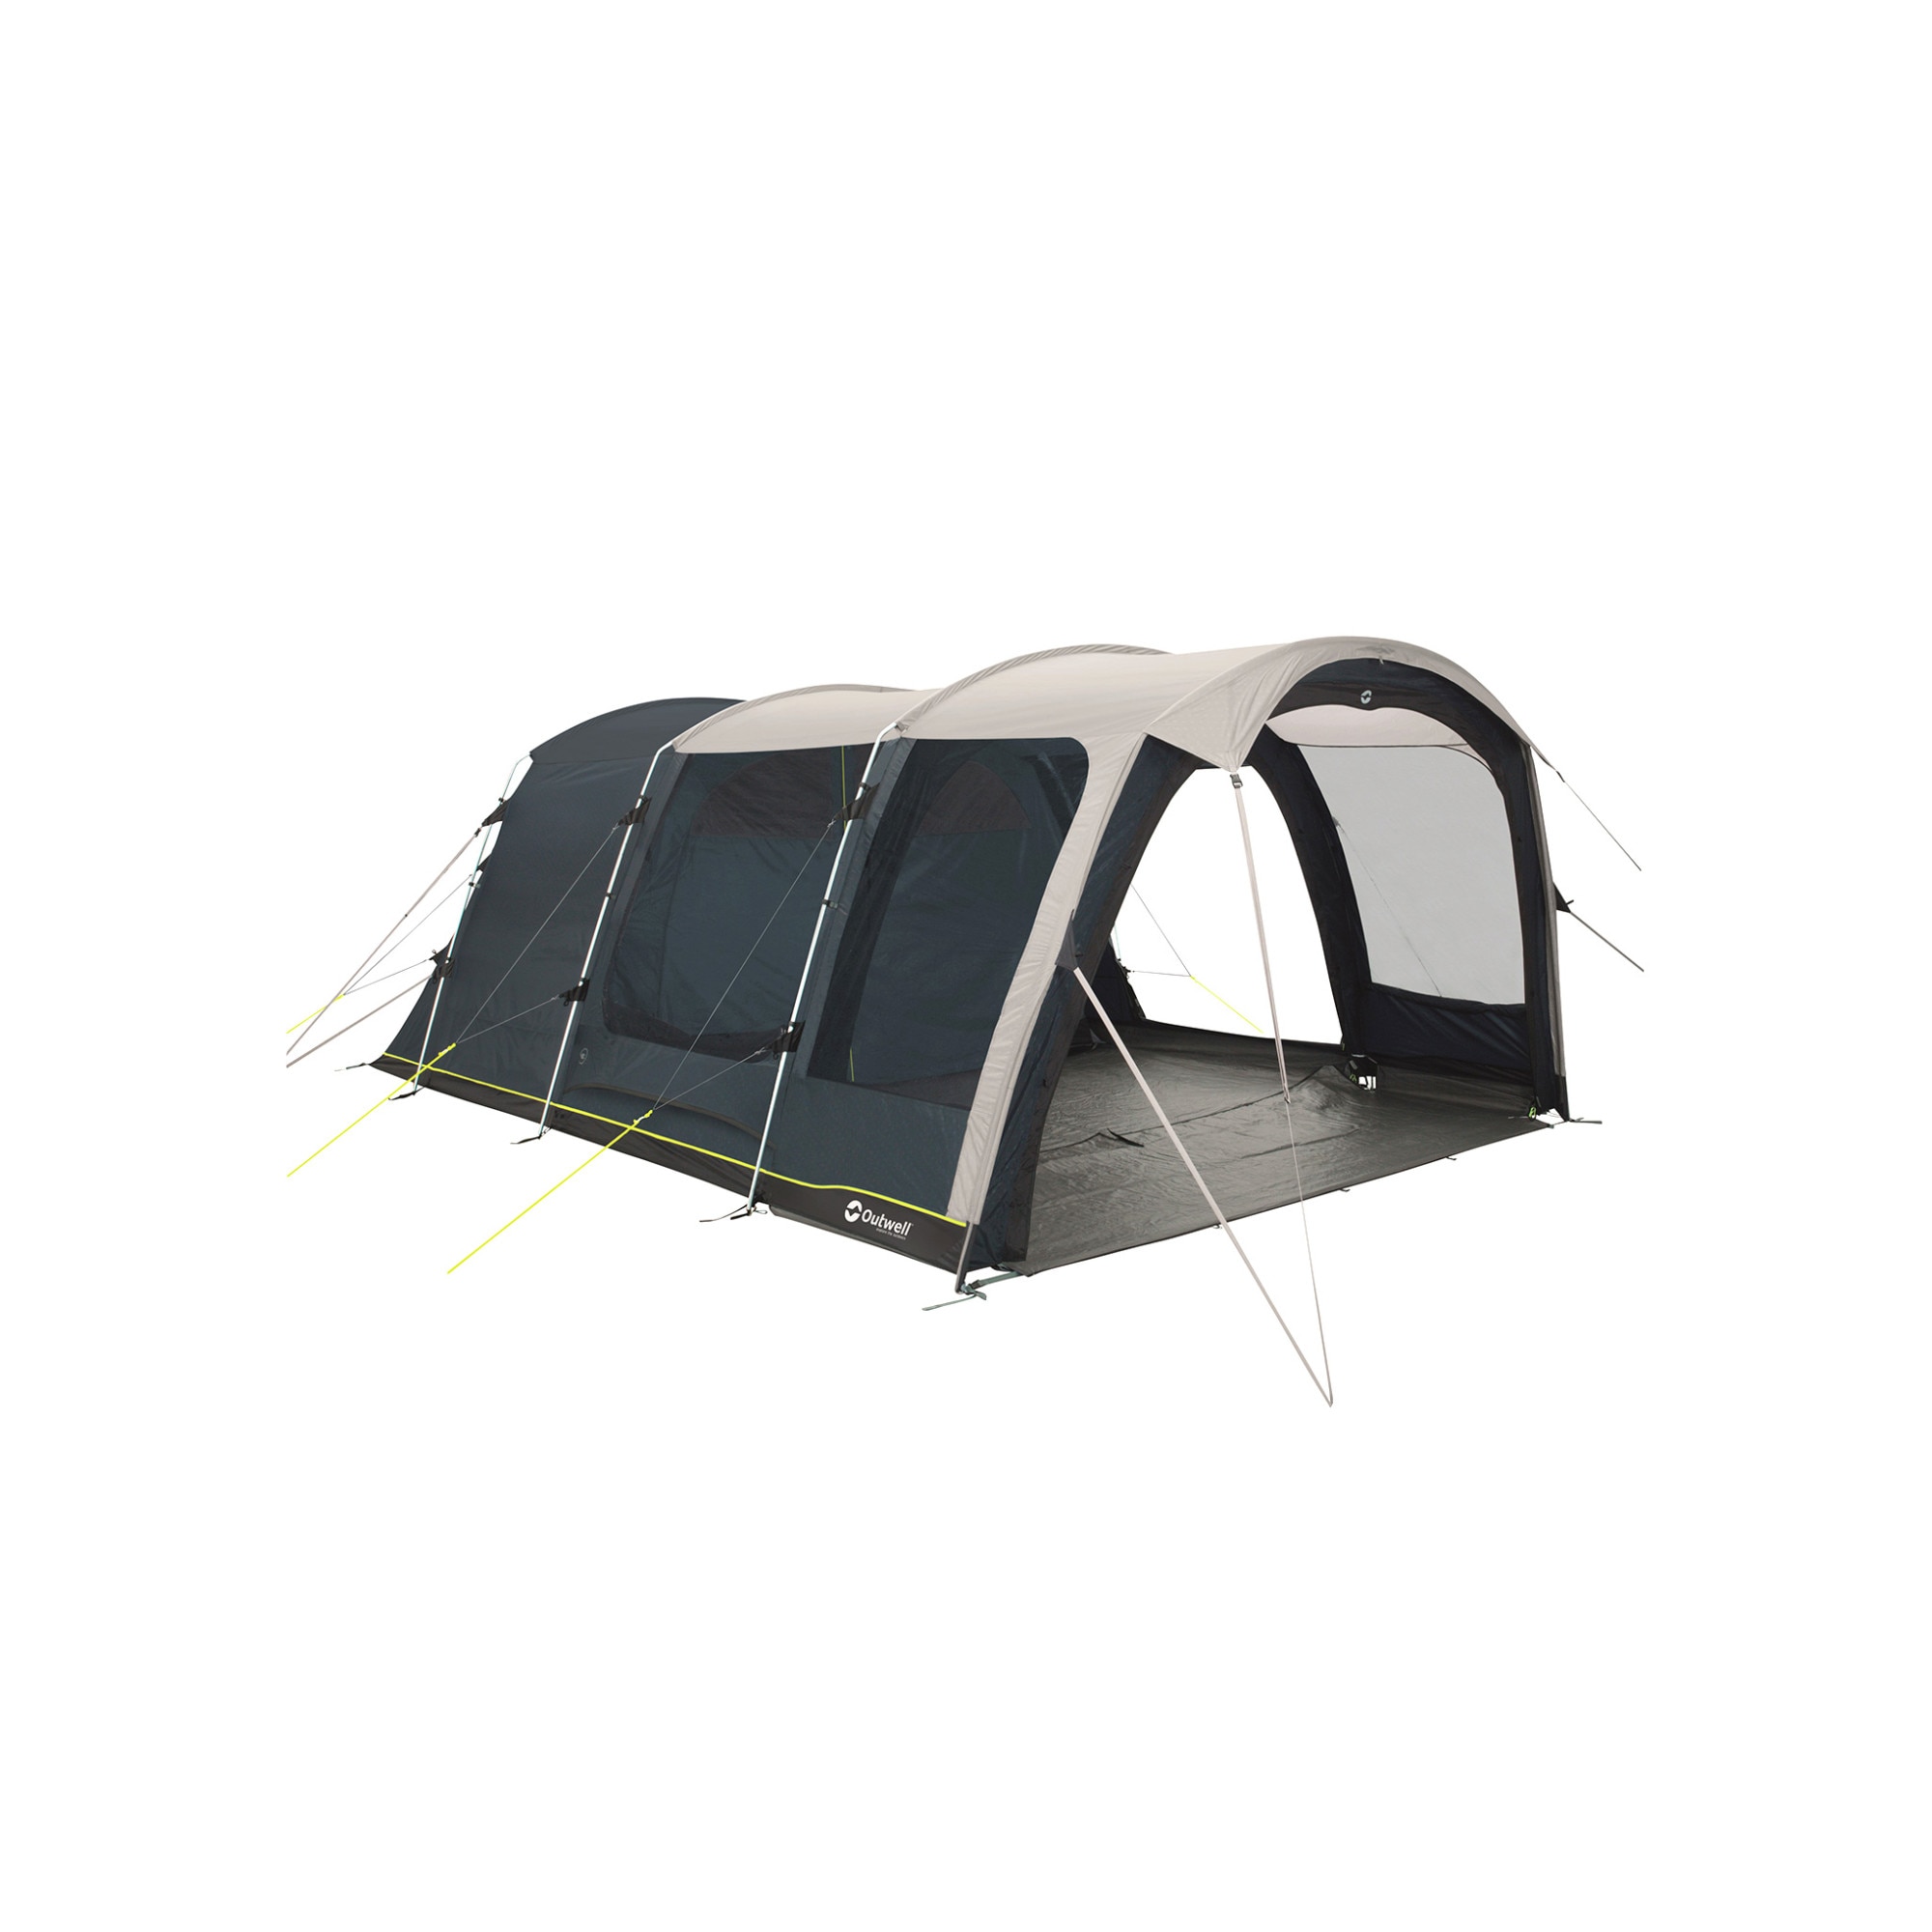 Cort camping Outwell Rockland, Poliester, 5 persoane, 6000mm, Multicolor -